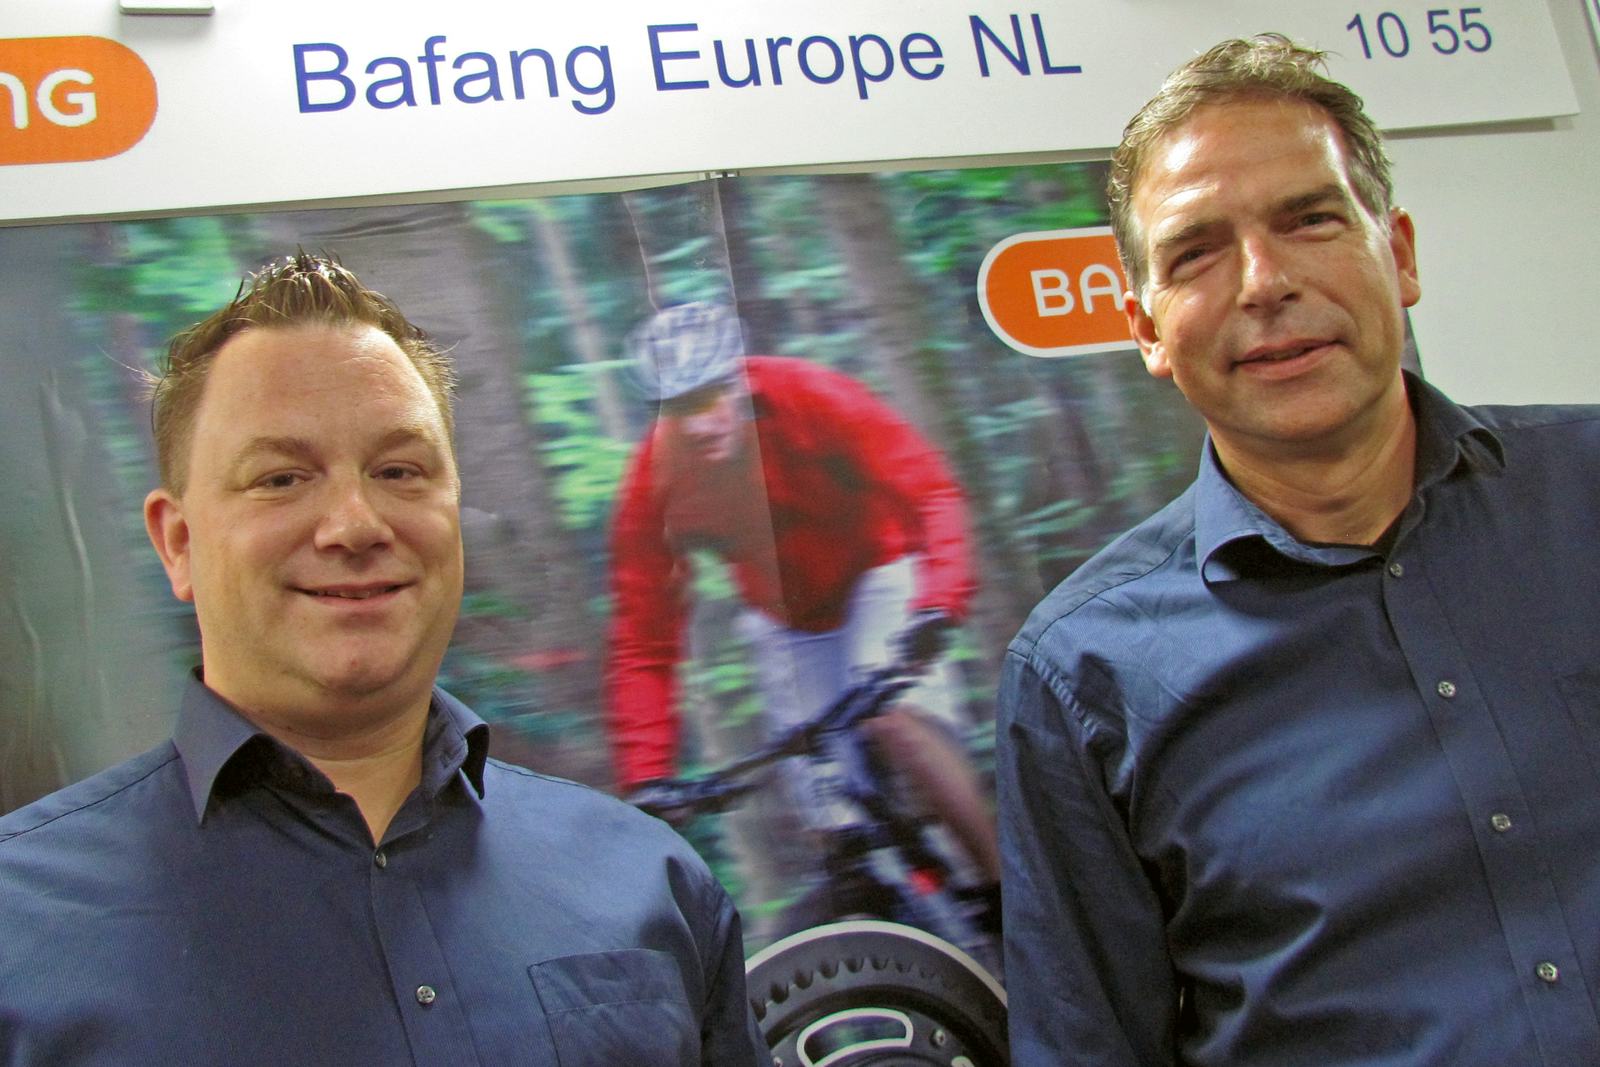 Bart van den Boom (left), technical manager, and Jack Brandsen, general manager, (both coming from NuVinci) are leading Bafang Europe. – Photo Bike Europe